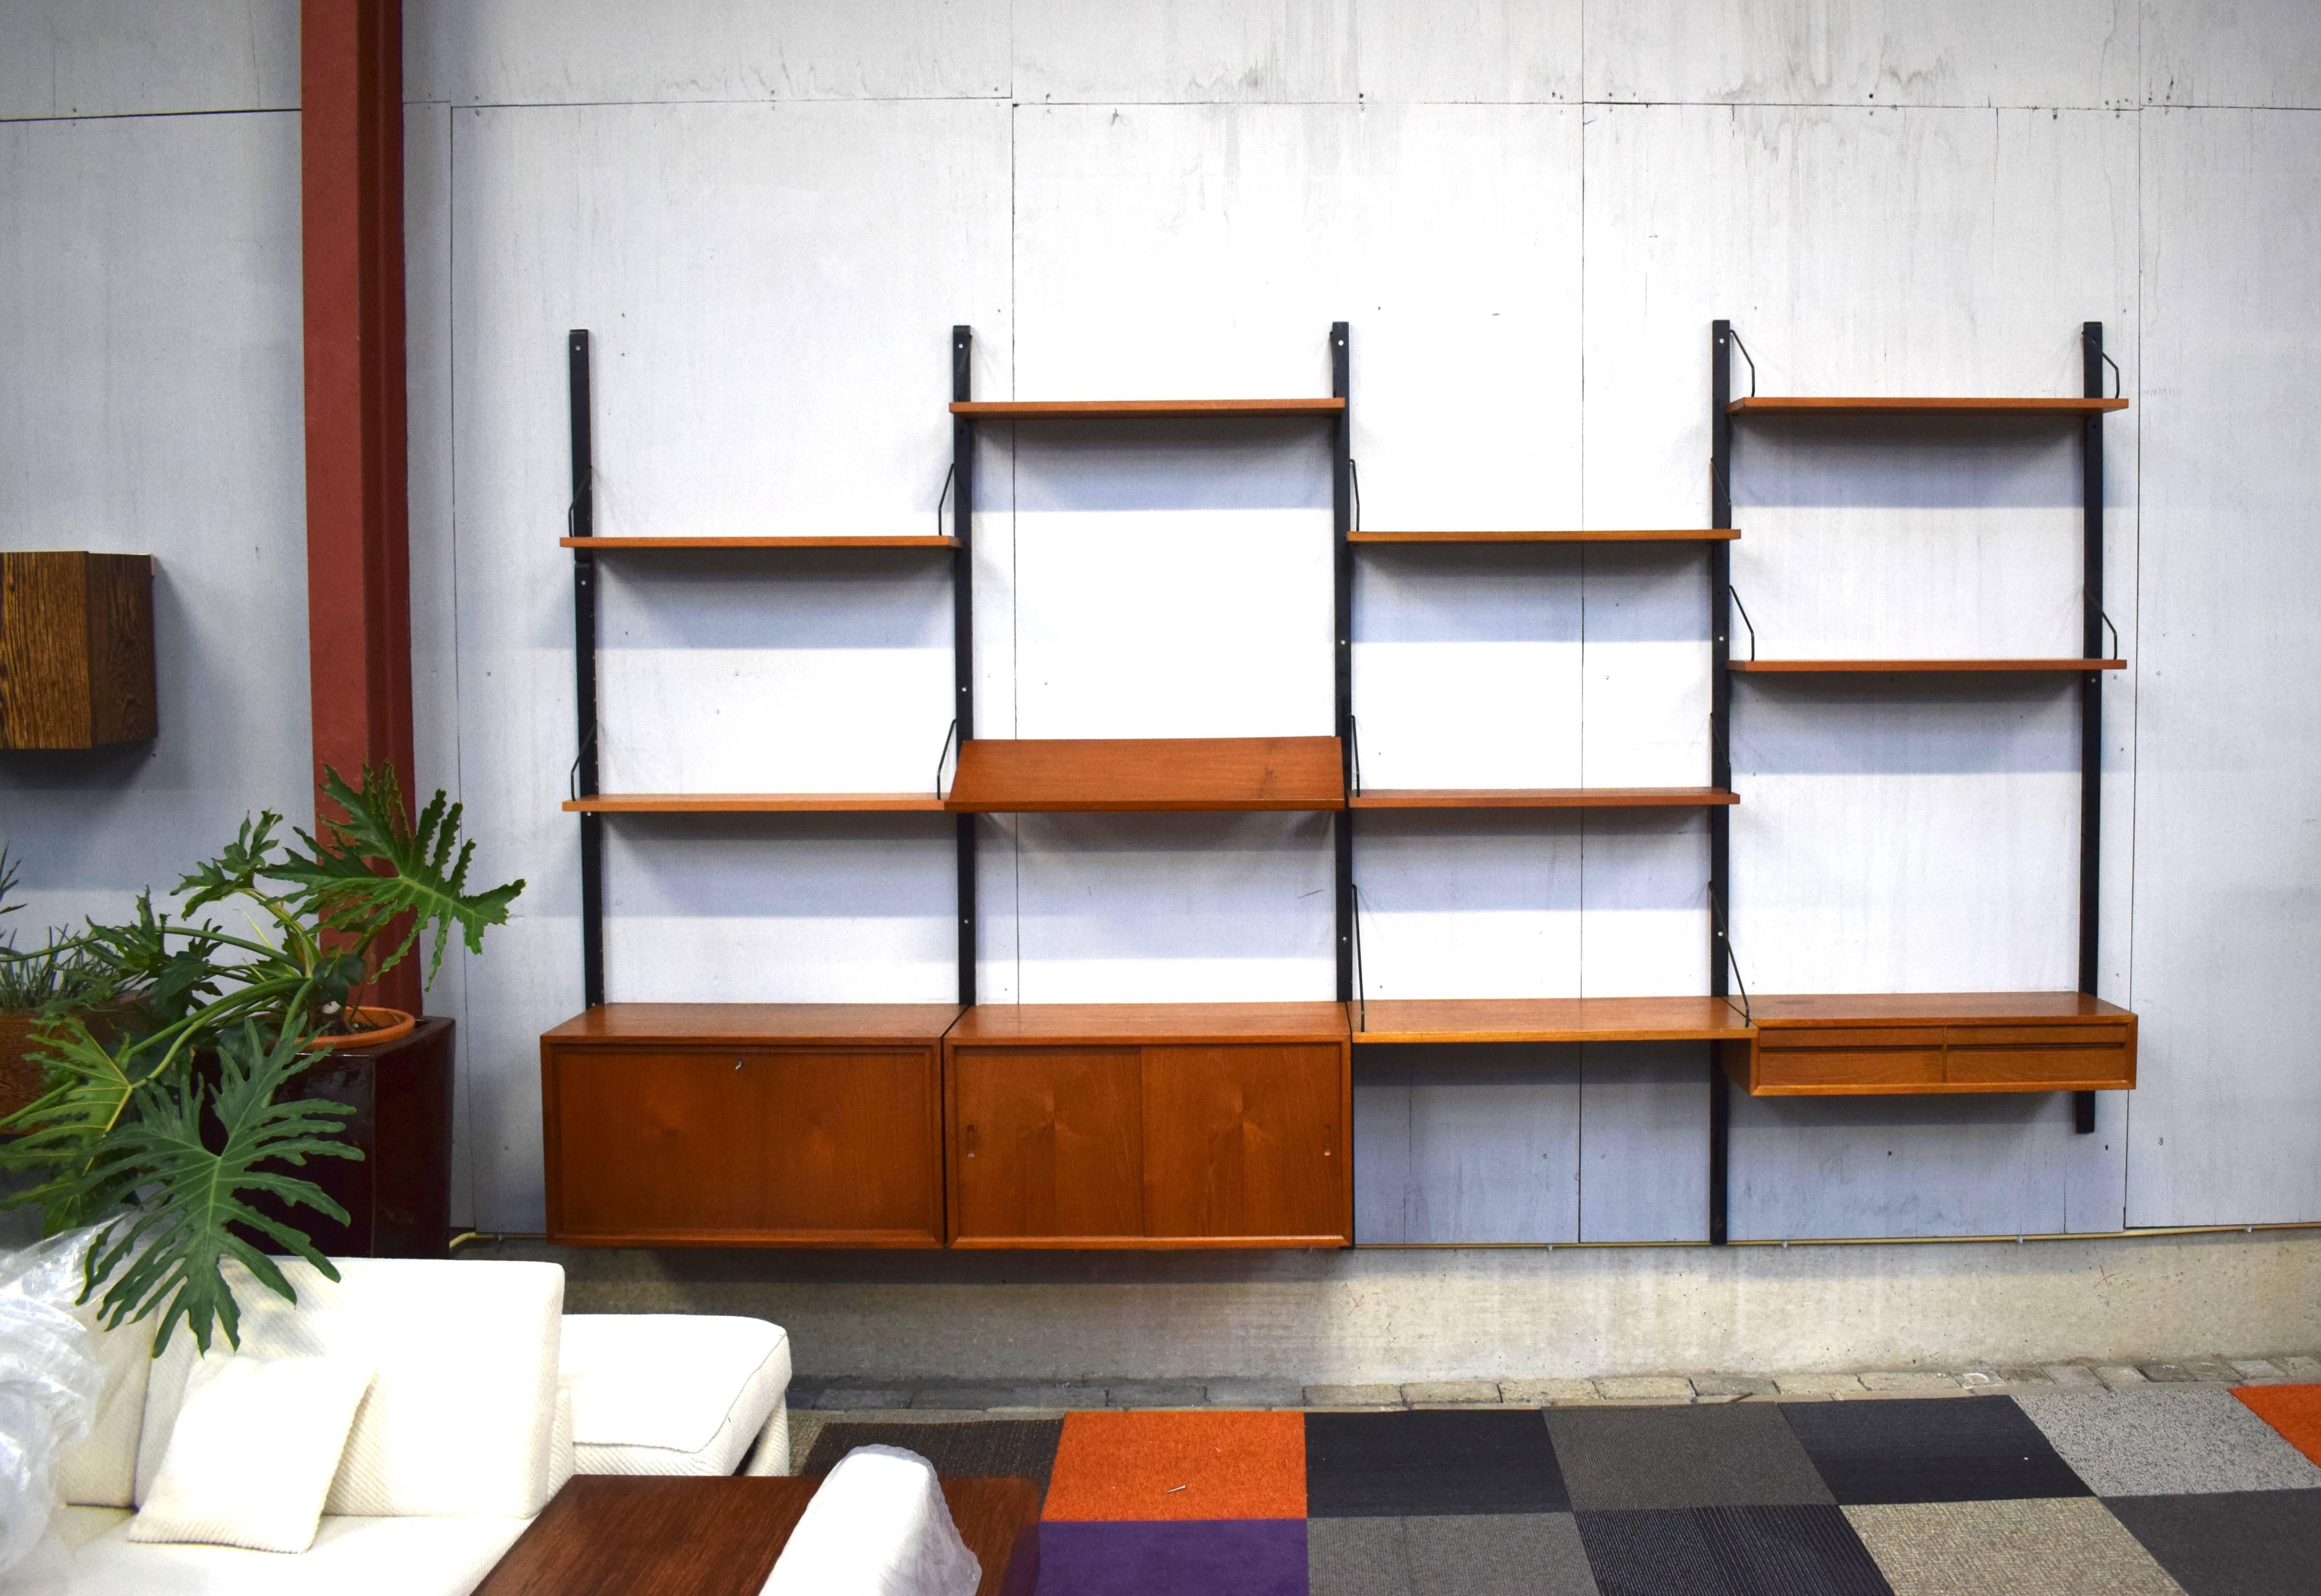 Royal series wall unit by Poul Cadovius.
With much wanted lecture shelve.
The wall unit is modular so it can be arranged to your own liking.

Designer: Poul Cadovius
Manufacturer: Cado
Country: Denmark
Model: Modular wall unit
Design period: